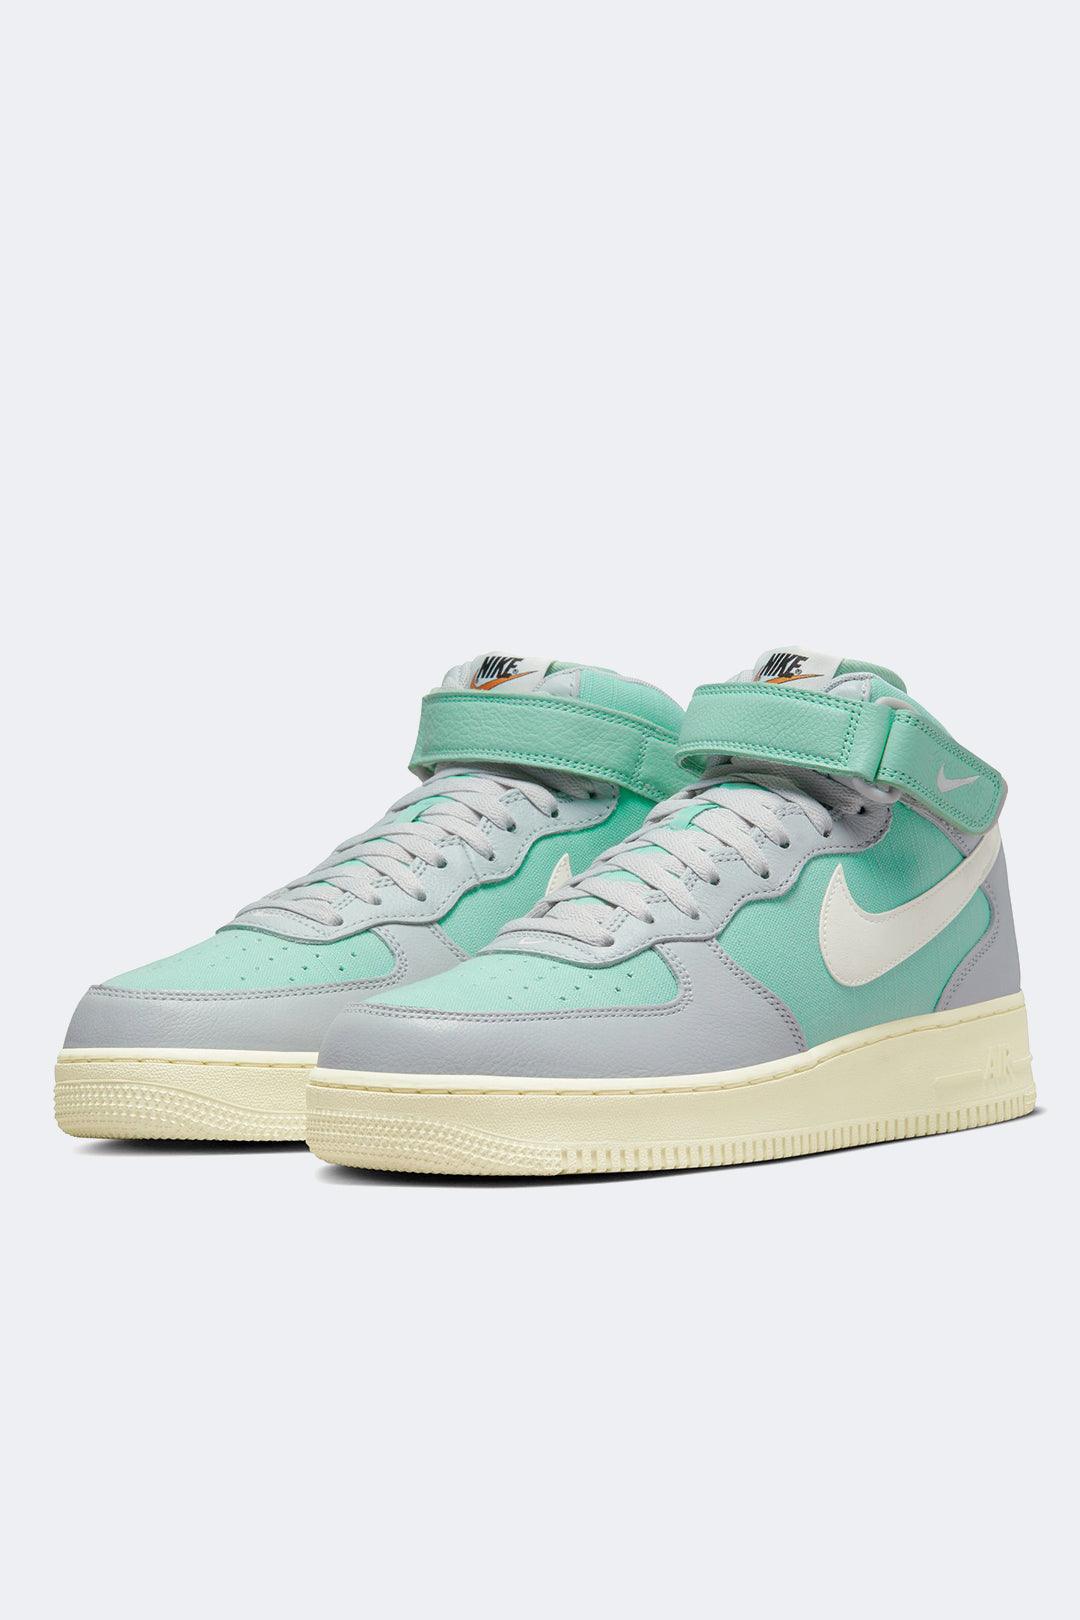 NIKE AIR FORCE 1 MID '07 LX VNTG - HYPE